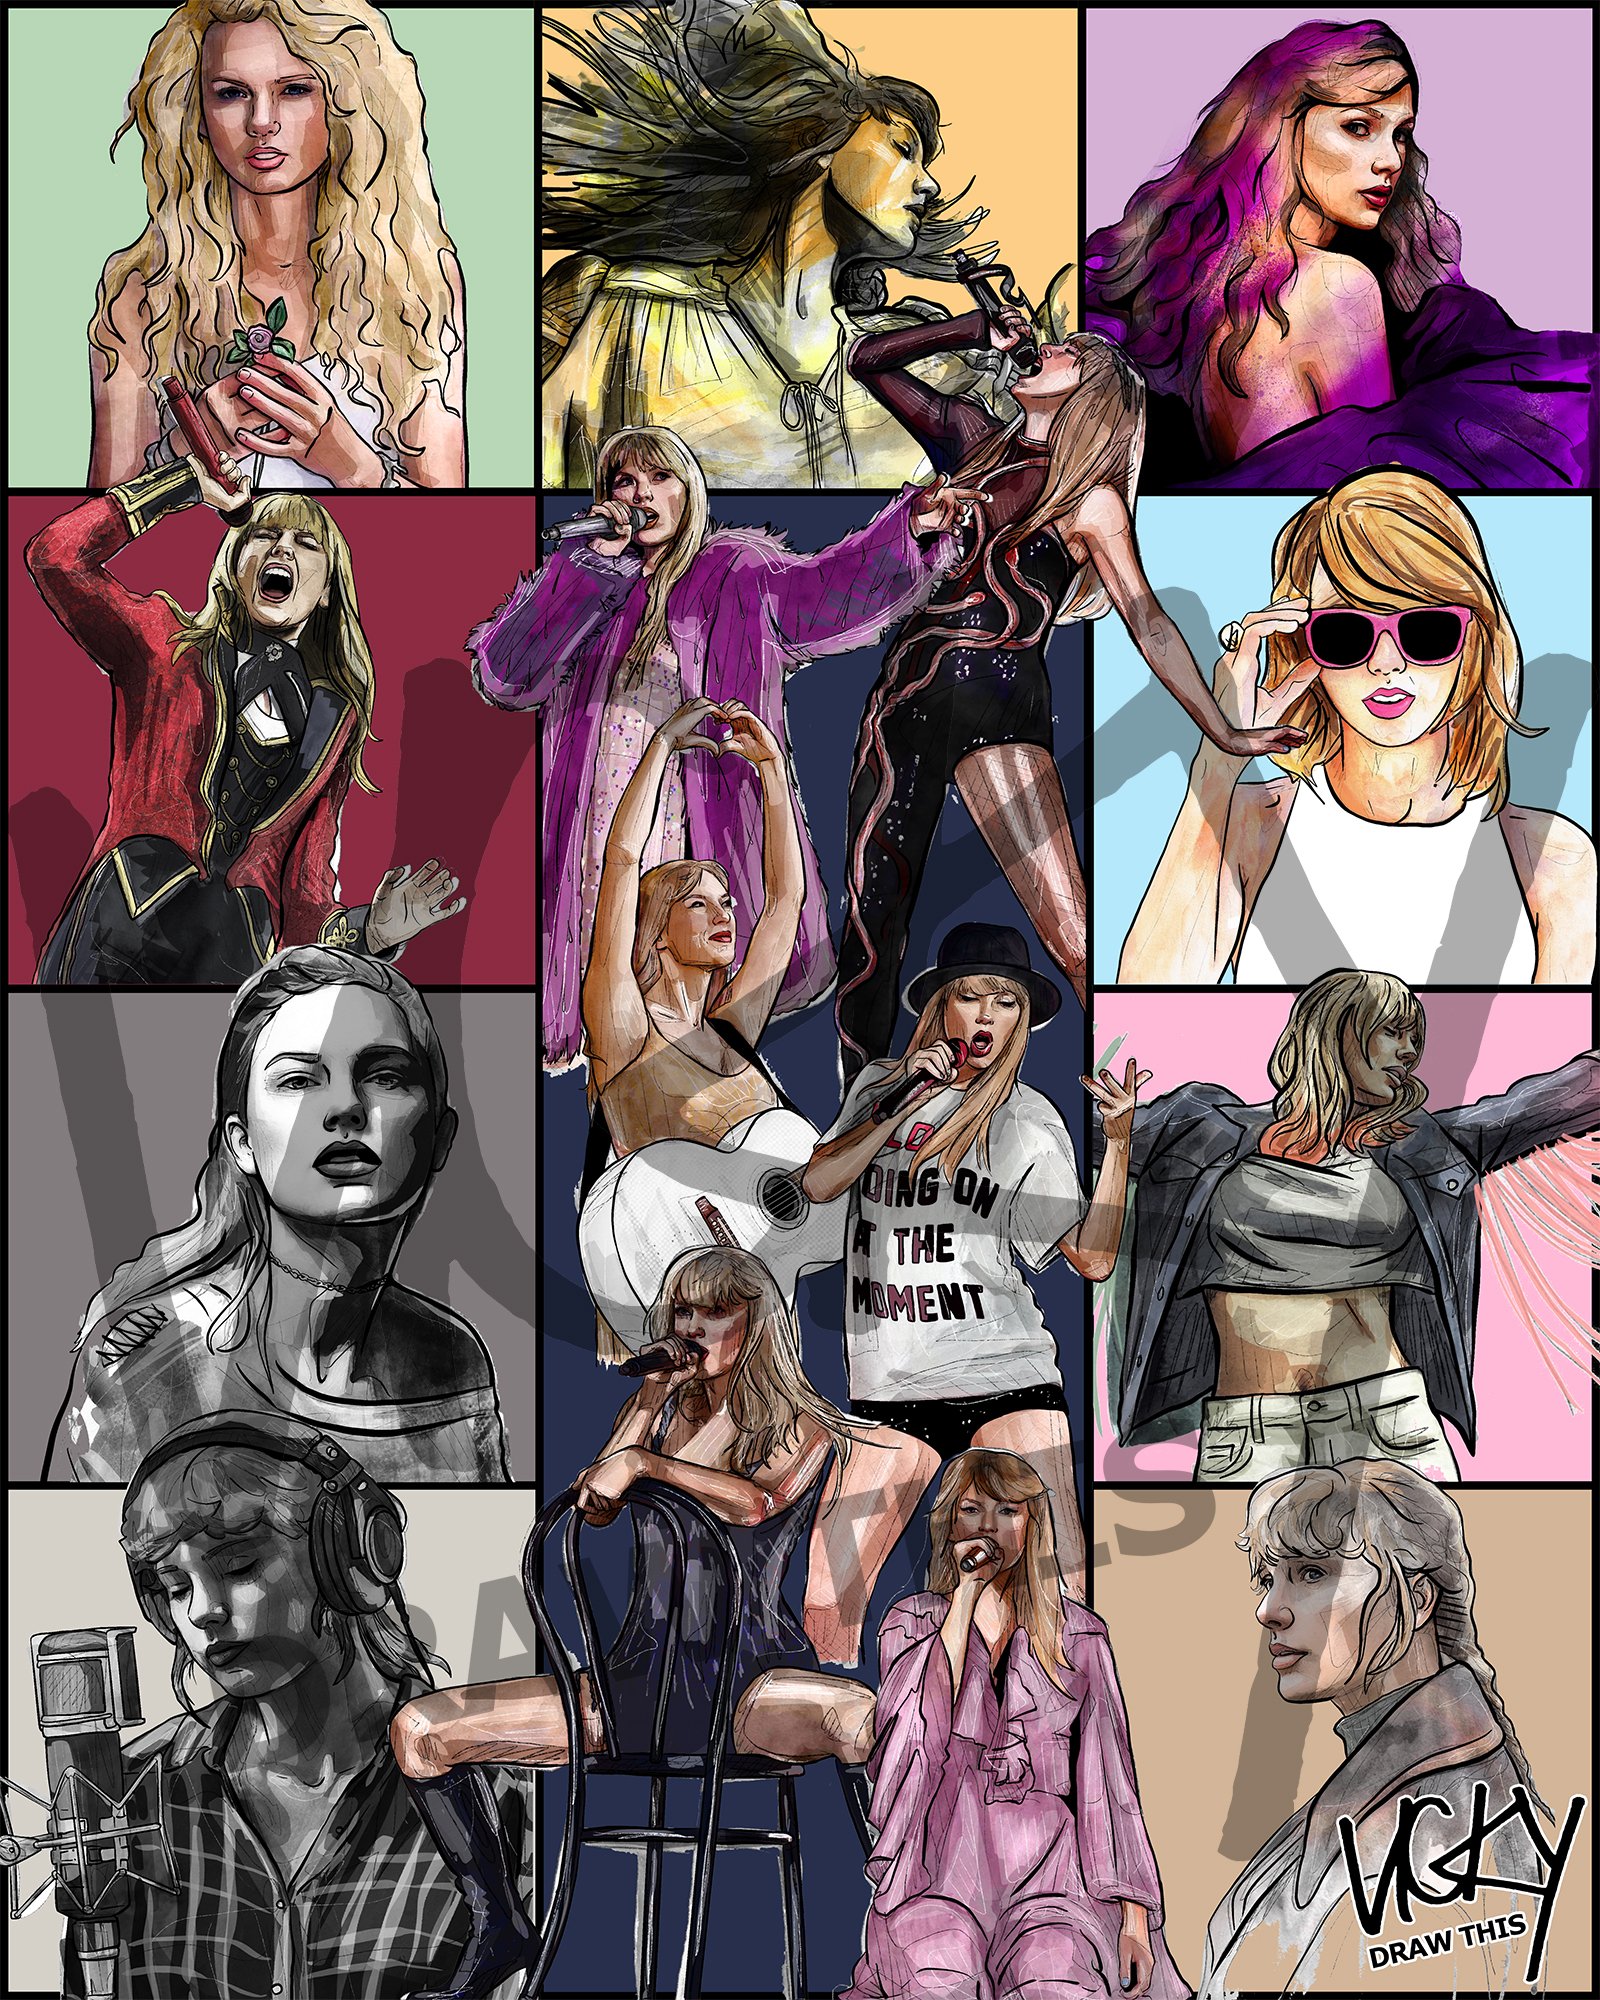 Folklore Drawing  Taylor swift drawing, Portrait sketches